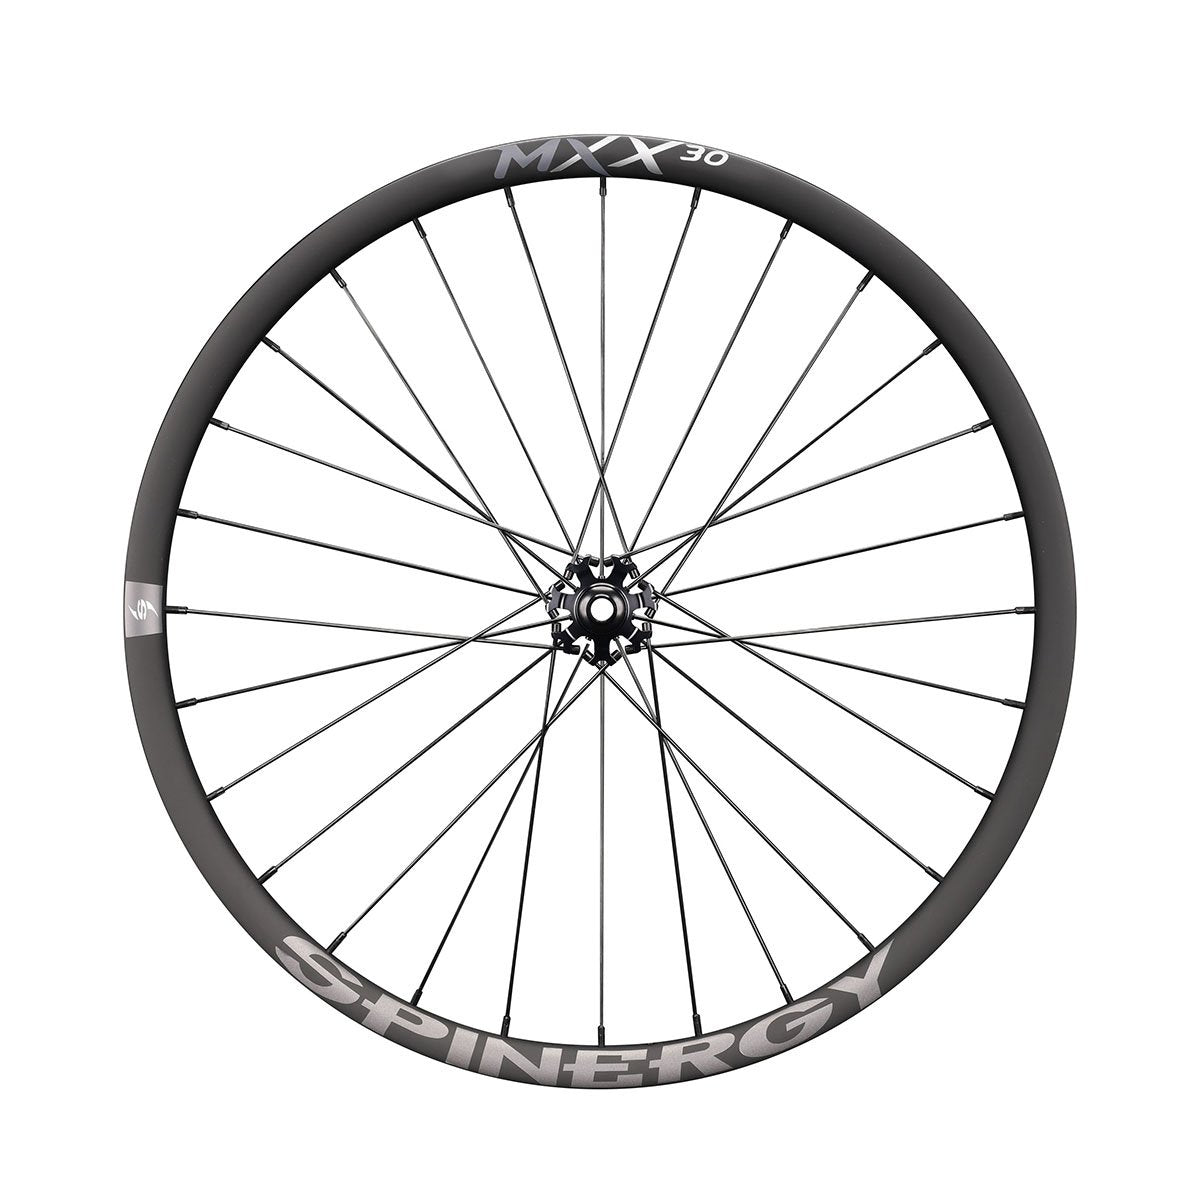 SPINERGY - MXX30, Front Bicycle Wheel - MTB - 2021 w/ "44" Hub